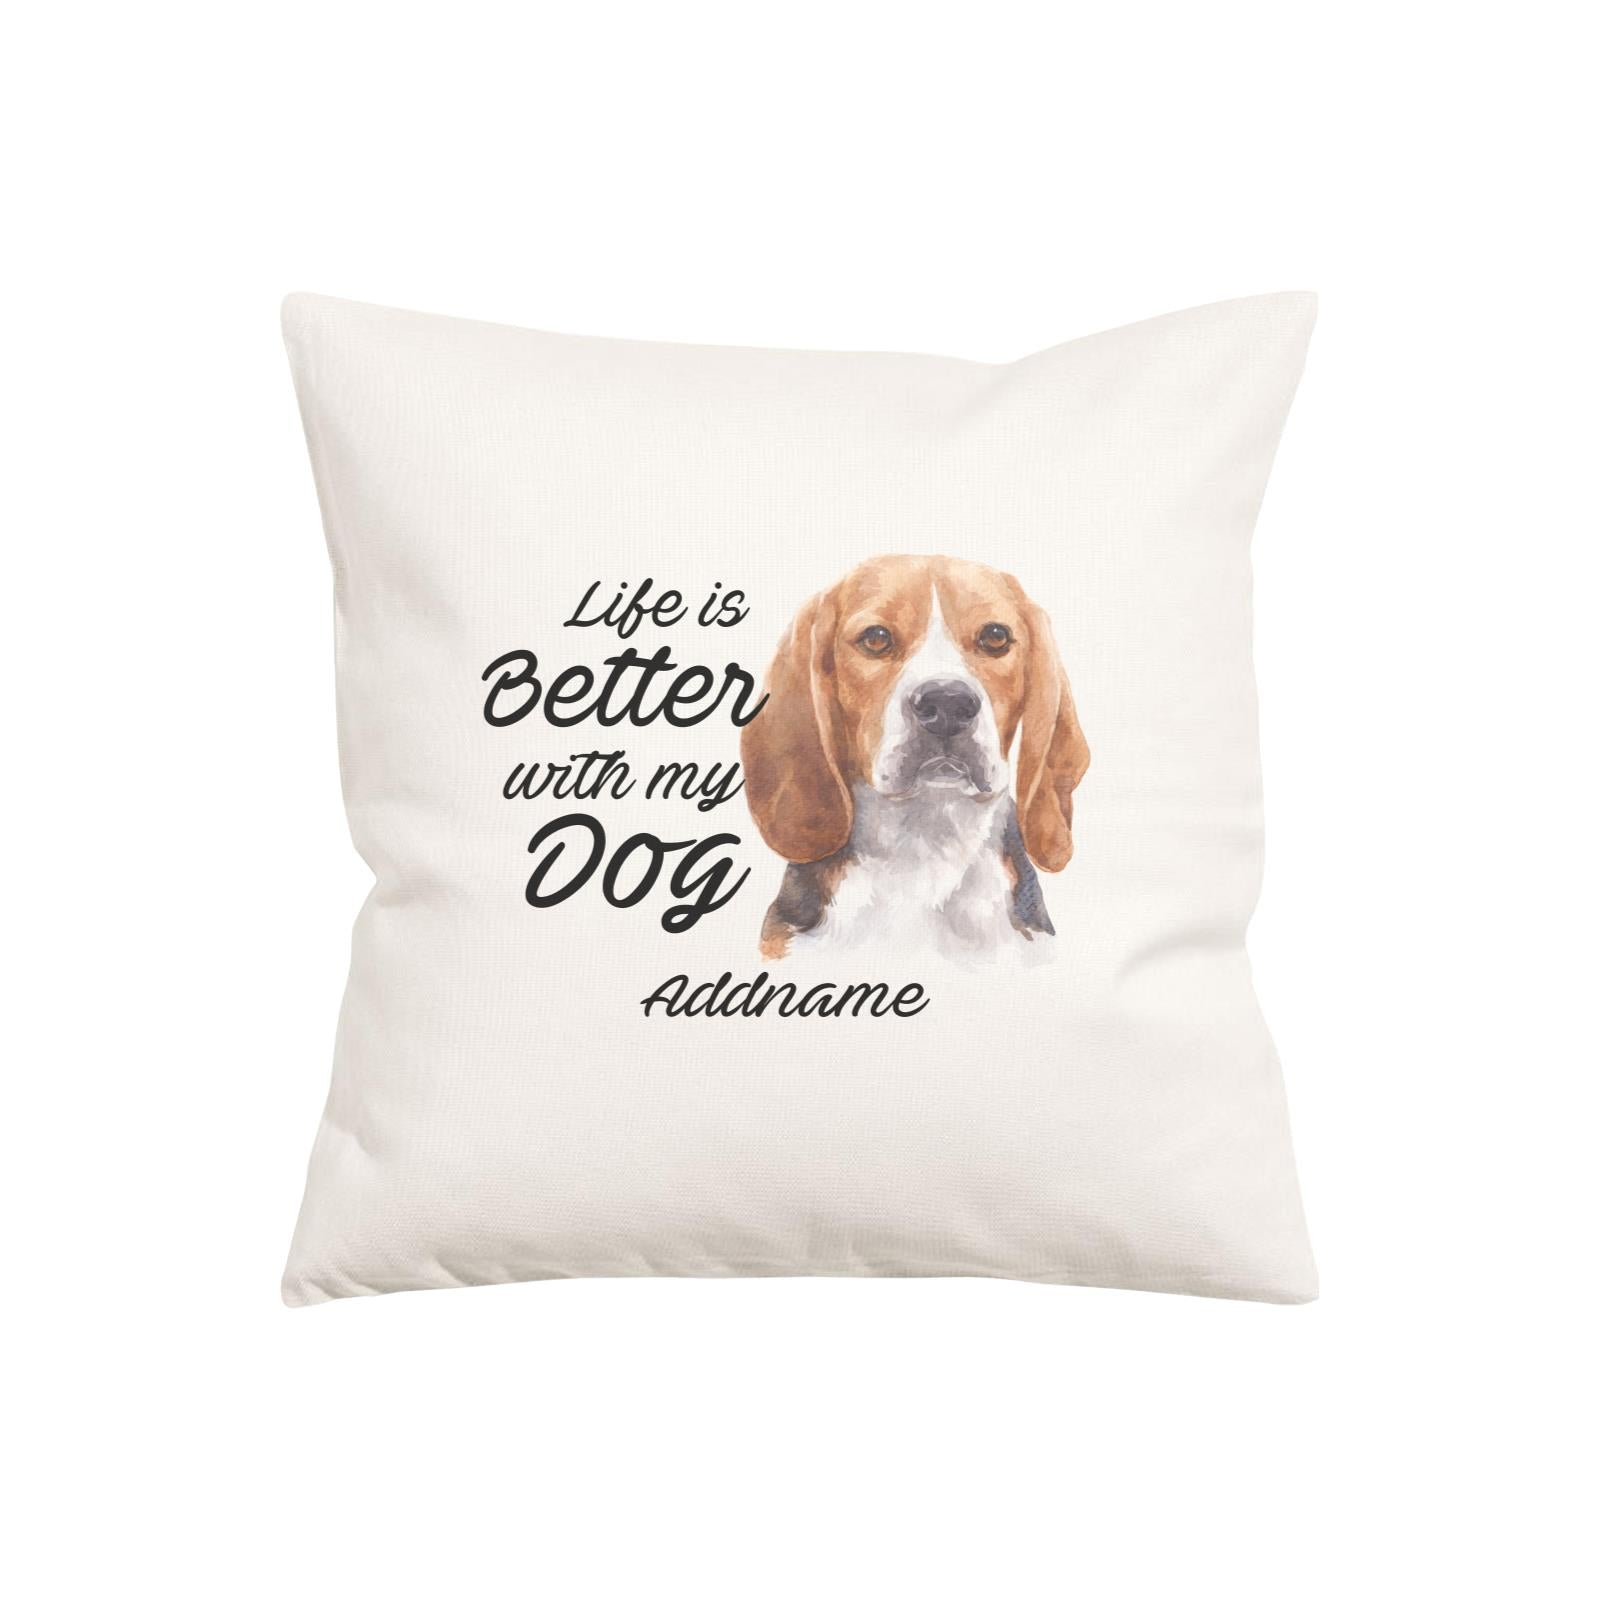 Watercolor Life is Better With My Dog Beagle Frown Addname Pillow Cushion